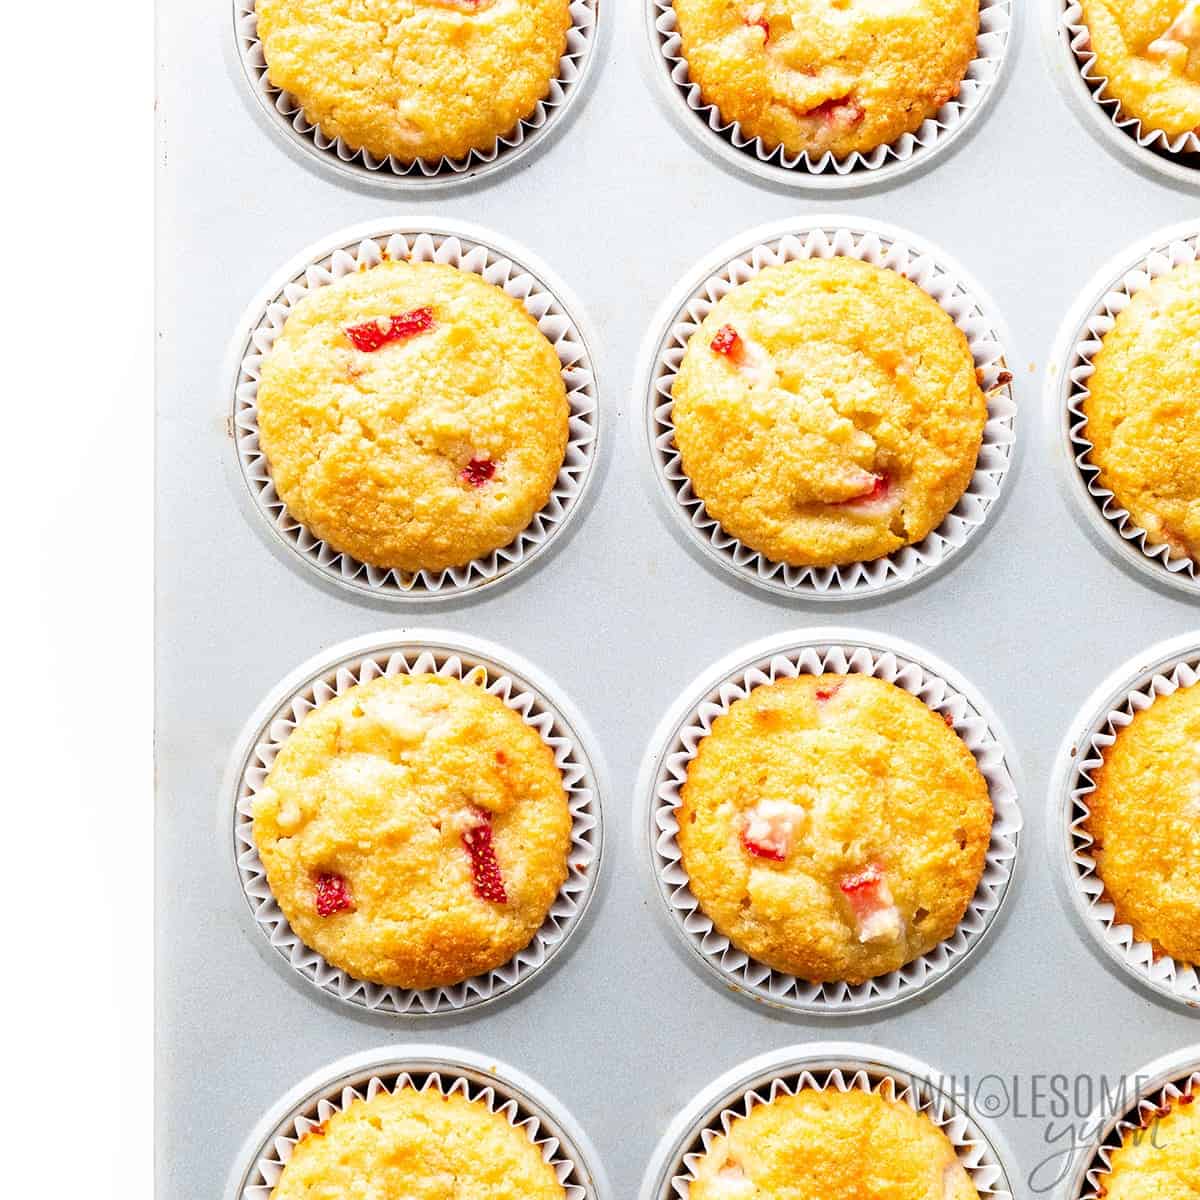 Fully baked almond flour muffins in muffin tin.